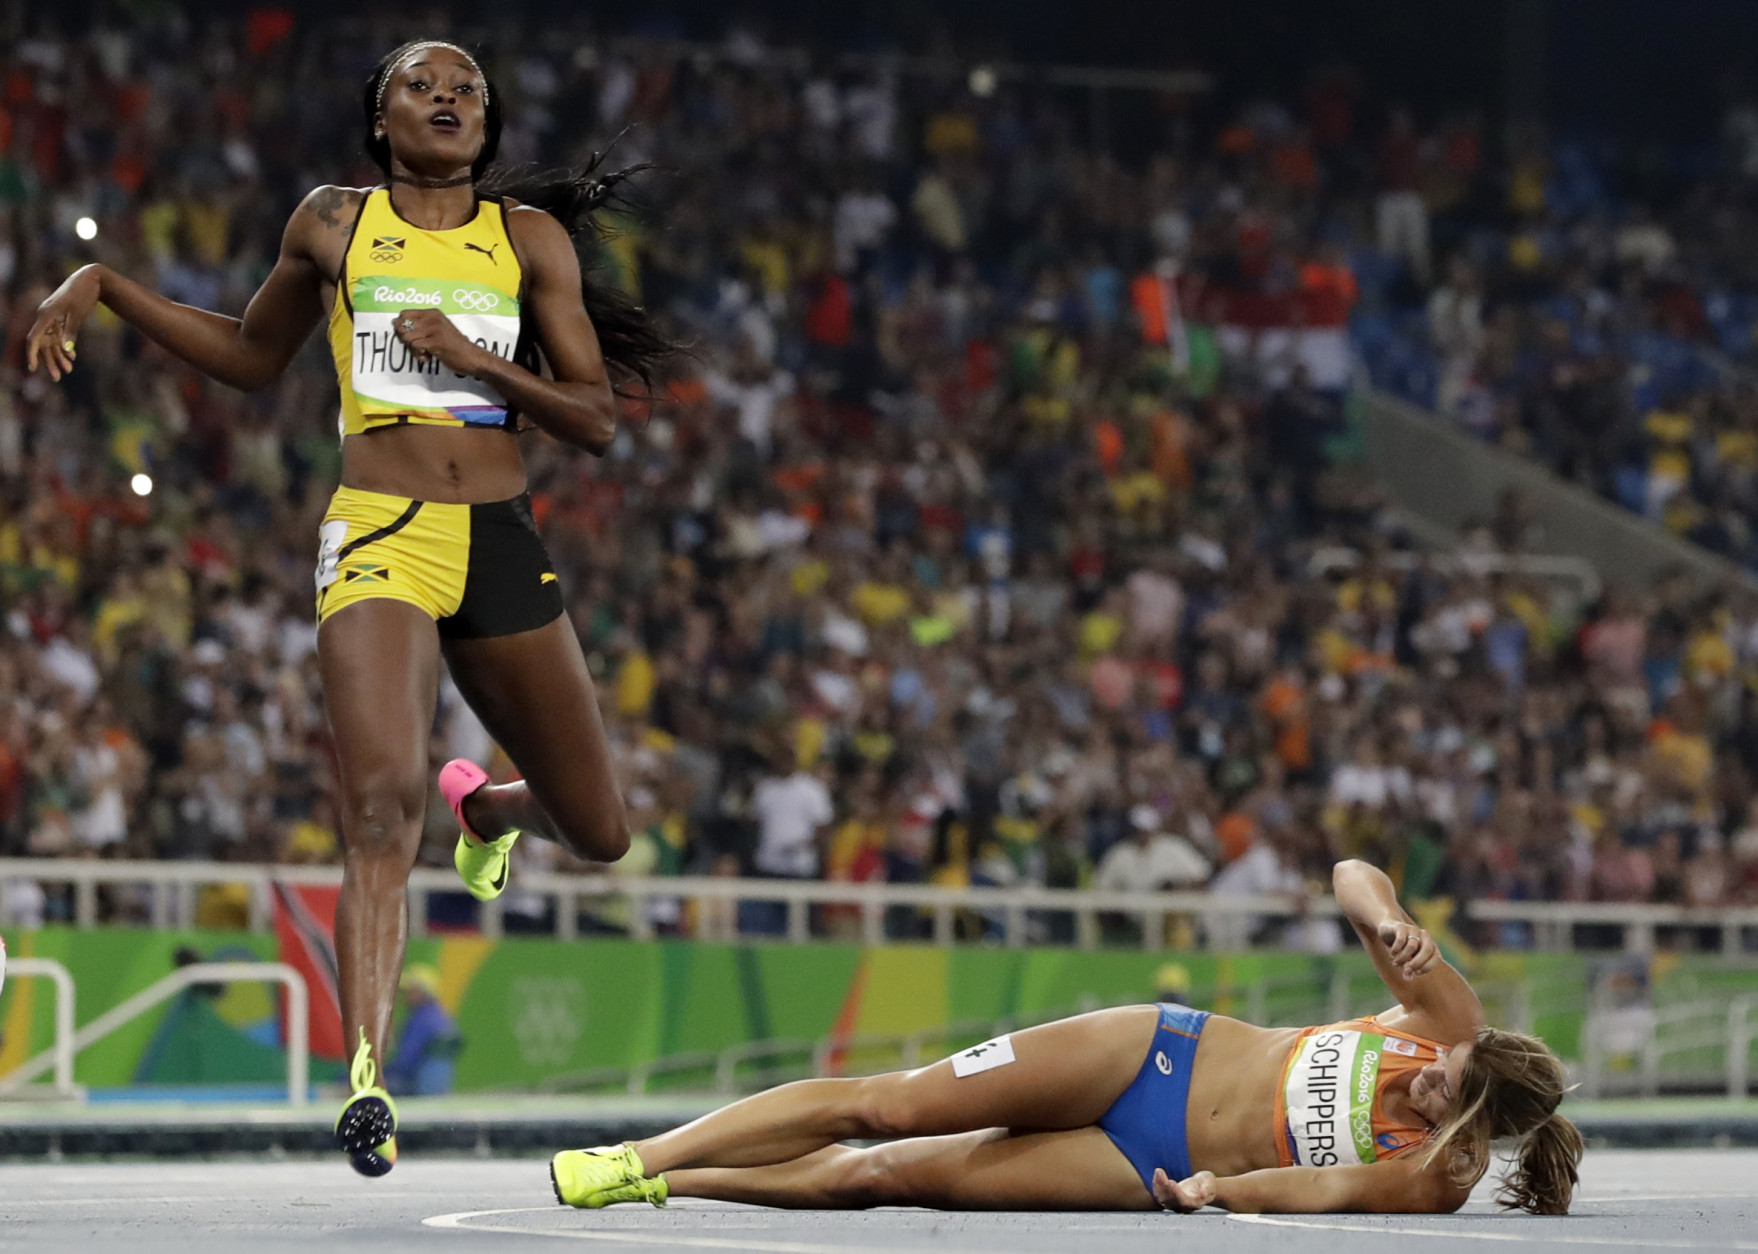 Second placed Netherlands' Dafne Schippers lies on the ground after falling over the finish line as Elaine Thompson from Jamaica, left, wins the gold in the women's 200-meter final during the athletics competitions of the 2016 Summer Olympics at the Olympic stadium in Rio de Janeiro, Brazil, Wednesday, Aug. 17, 2016. (AP Photo/David J. Phillip)